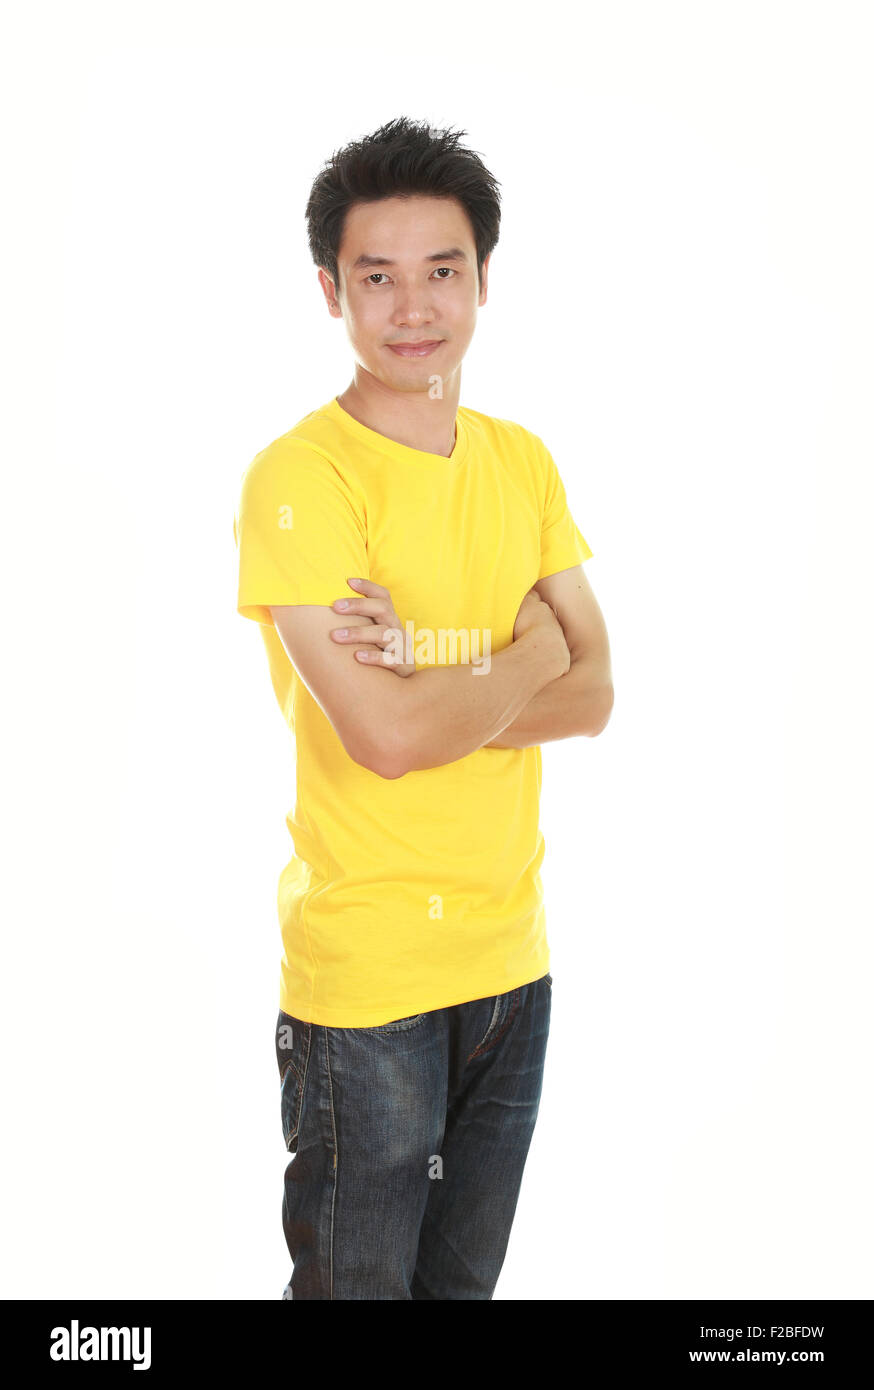 man with arms crossed, wearing yellow t-shirt isolated on white background. Stock Photo